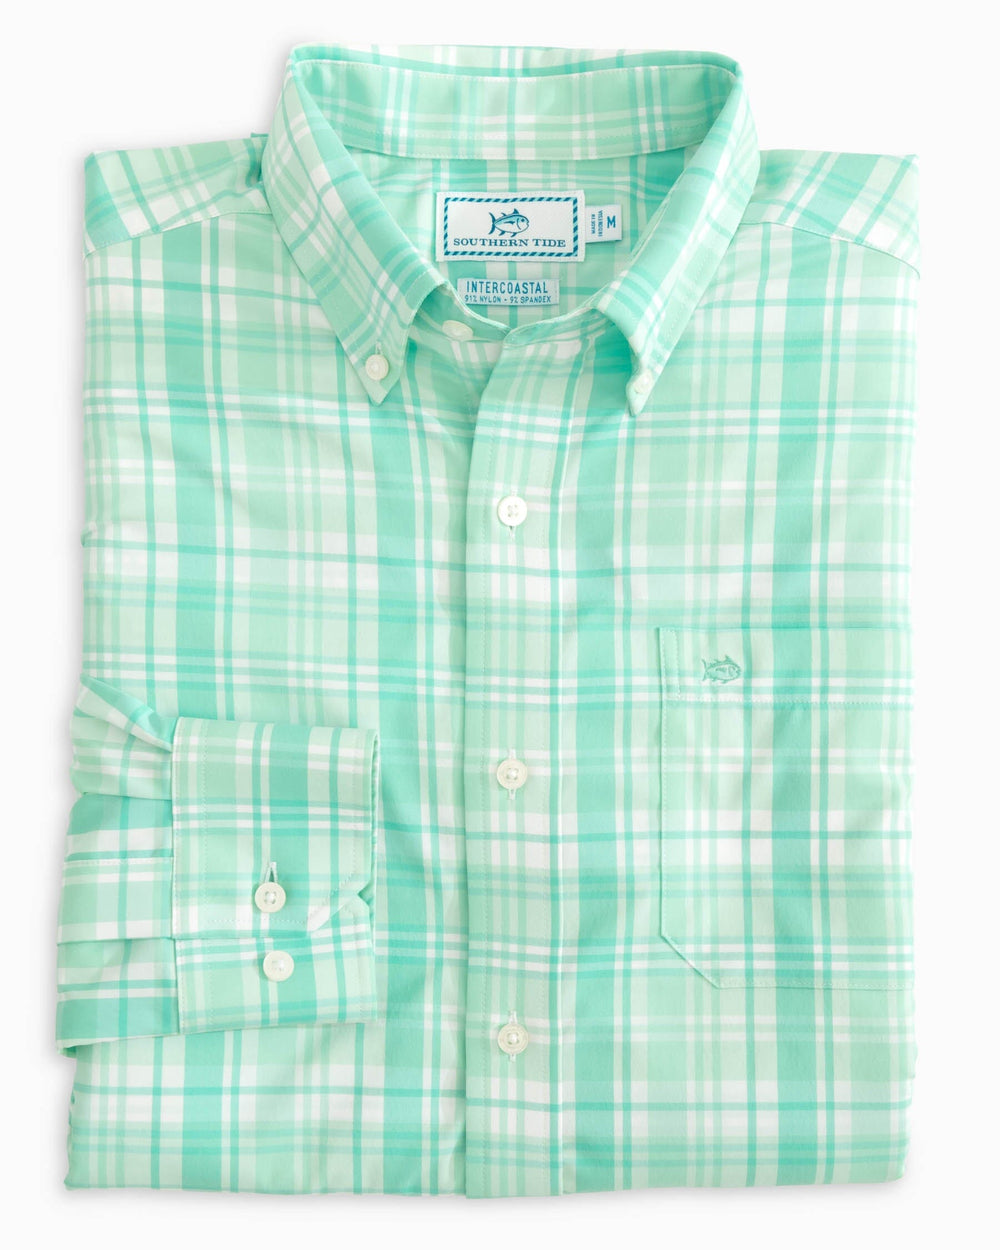 The folded front view of the Southern Tide Palm Cayon Plaid Intercoastal Sport Shirts by Southern Tide - Baltic Teal